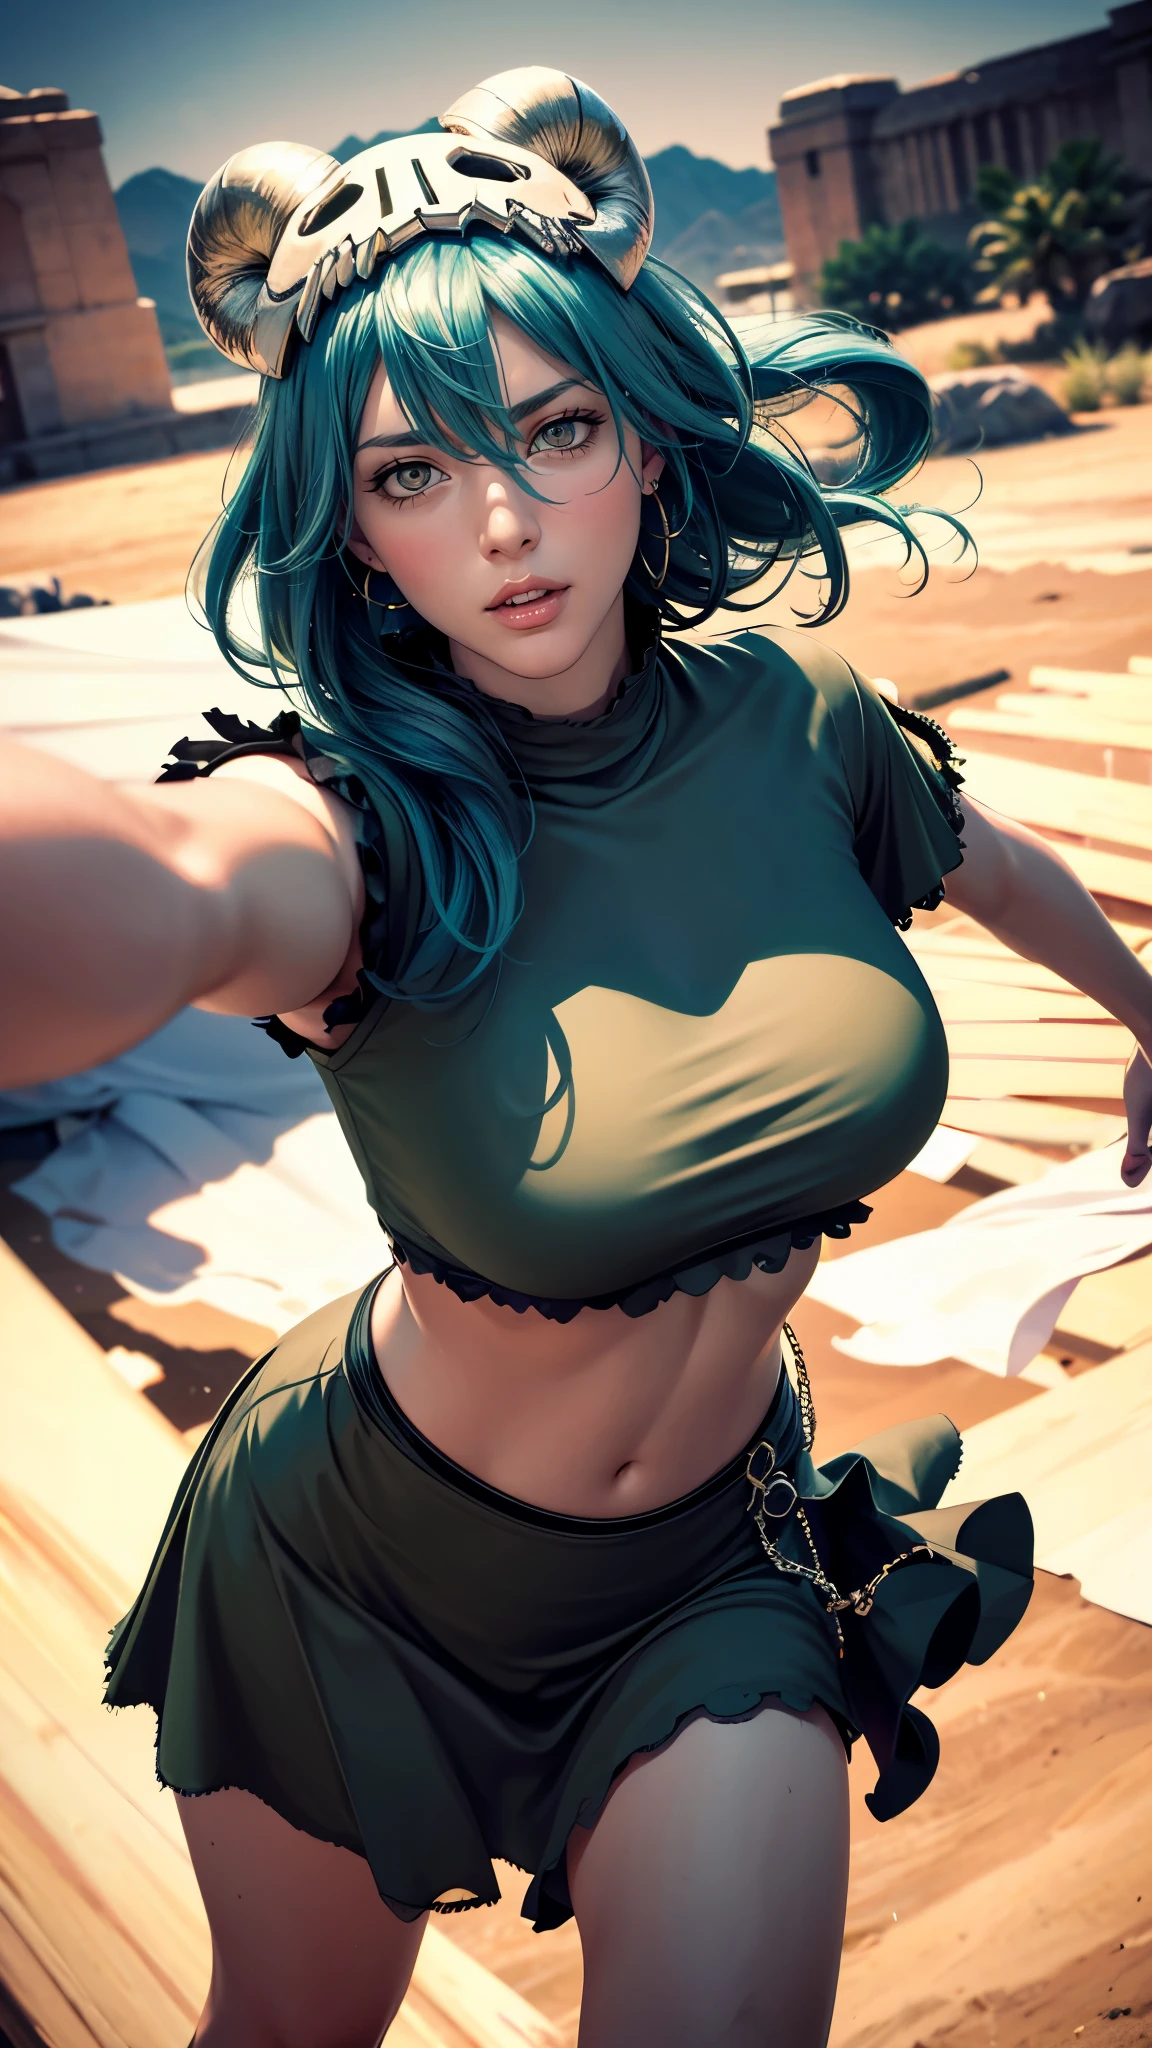 （（（Perfect figure，figure，odelschwanck，green clothes，（（（In the, long hair, facial mark, hair between eyes,  skull,skirt，yellow eyes，underboob,）））型figure:1.7））），((masterpiece)),high resolution, ((Best quality at best))，masterpiece，quality，Best quality，（（（ Exquisite facial features，looking at the audience,There is light in the eyes，Happy，nterlacing of light and shadow，huge boobs））），（（（looking into camera，desert background，Exaggerated perspective , ultra wide shot,blurry hand foreground）））